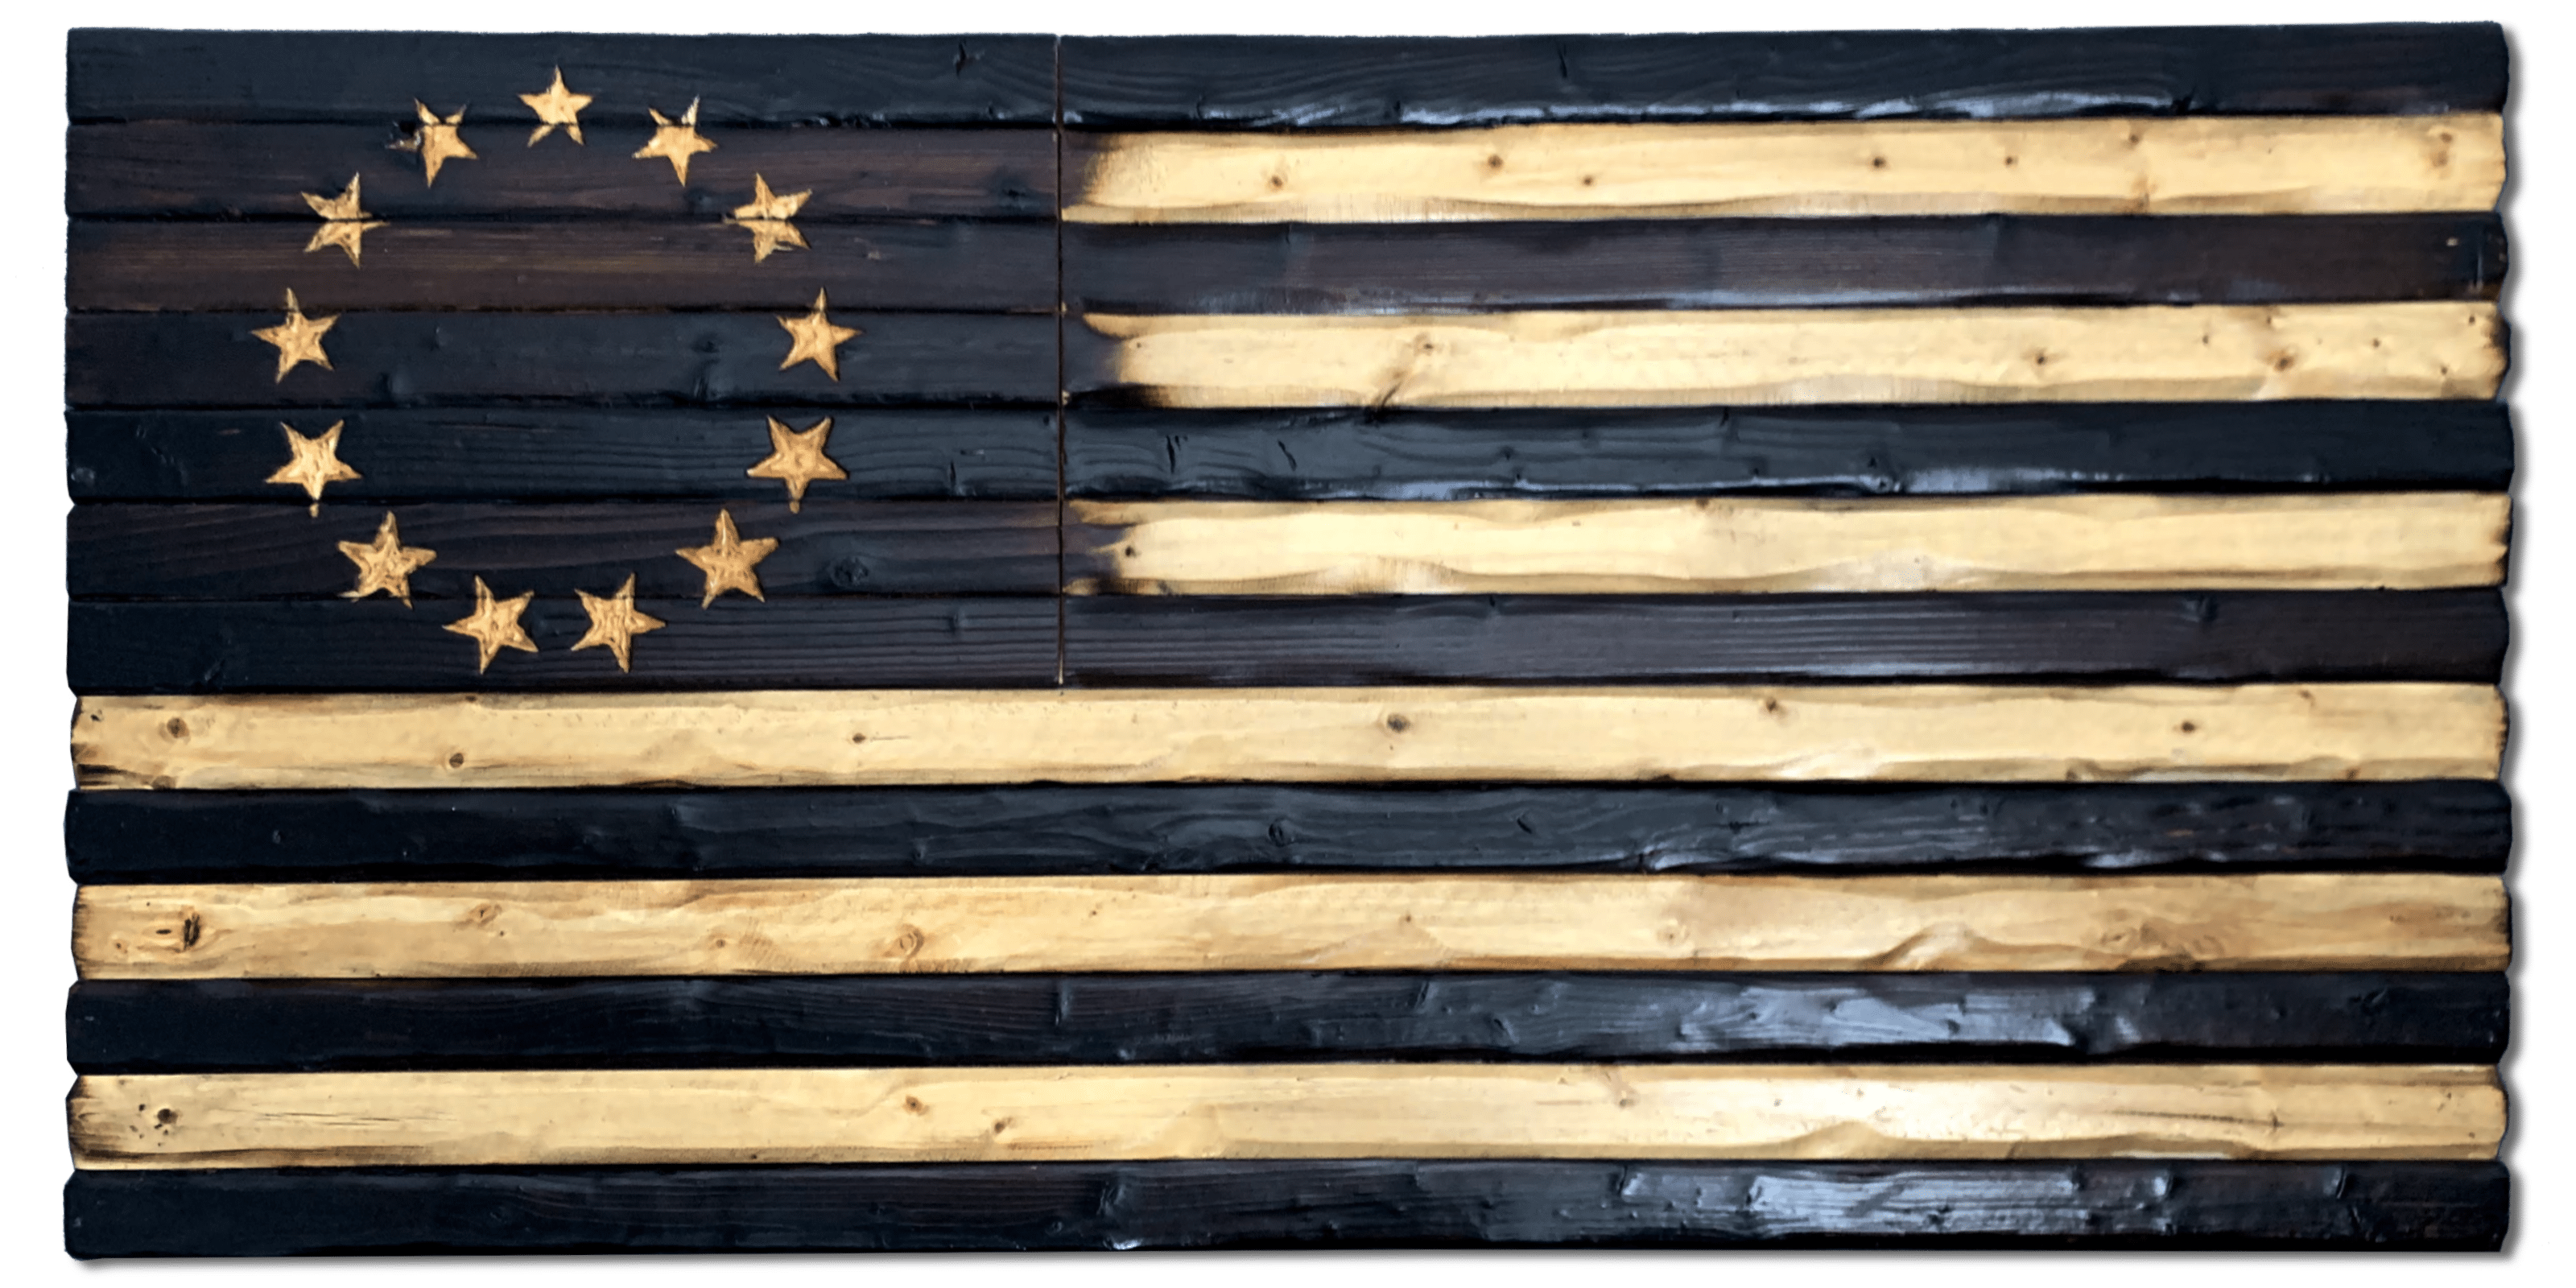 Charred Betsy Ross Handcarved Wooden Flag